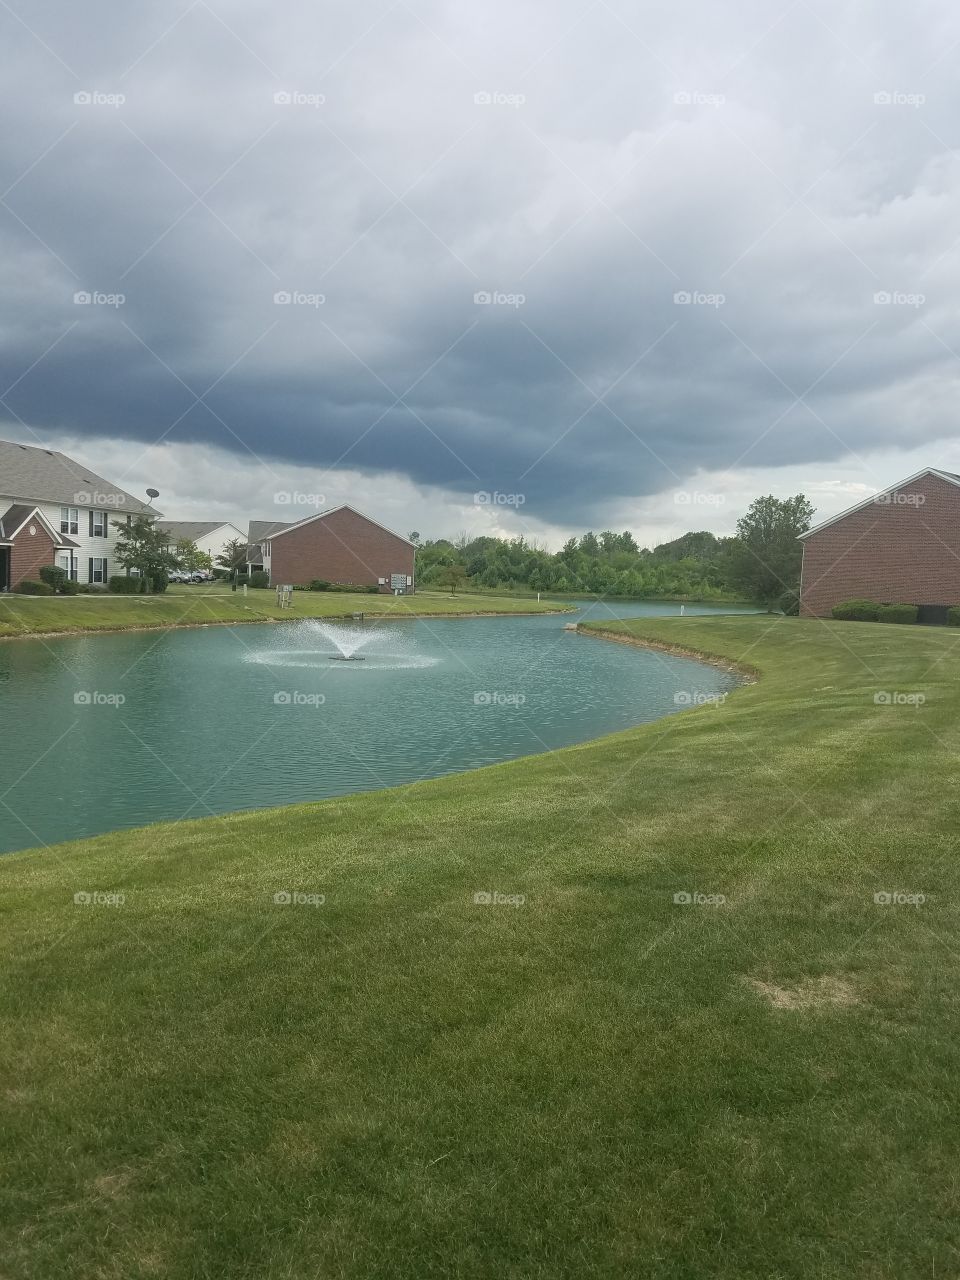 Awesome lake in front of the house